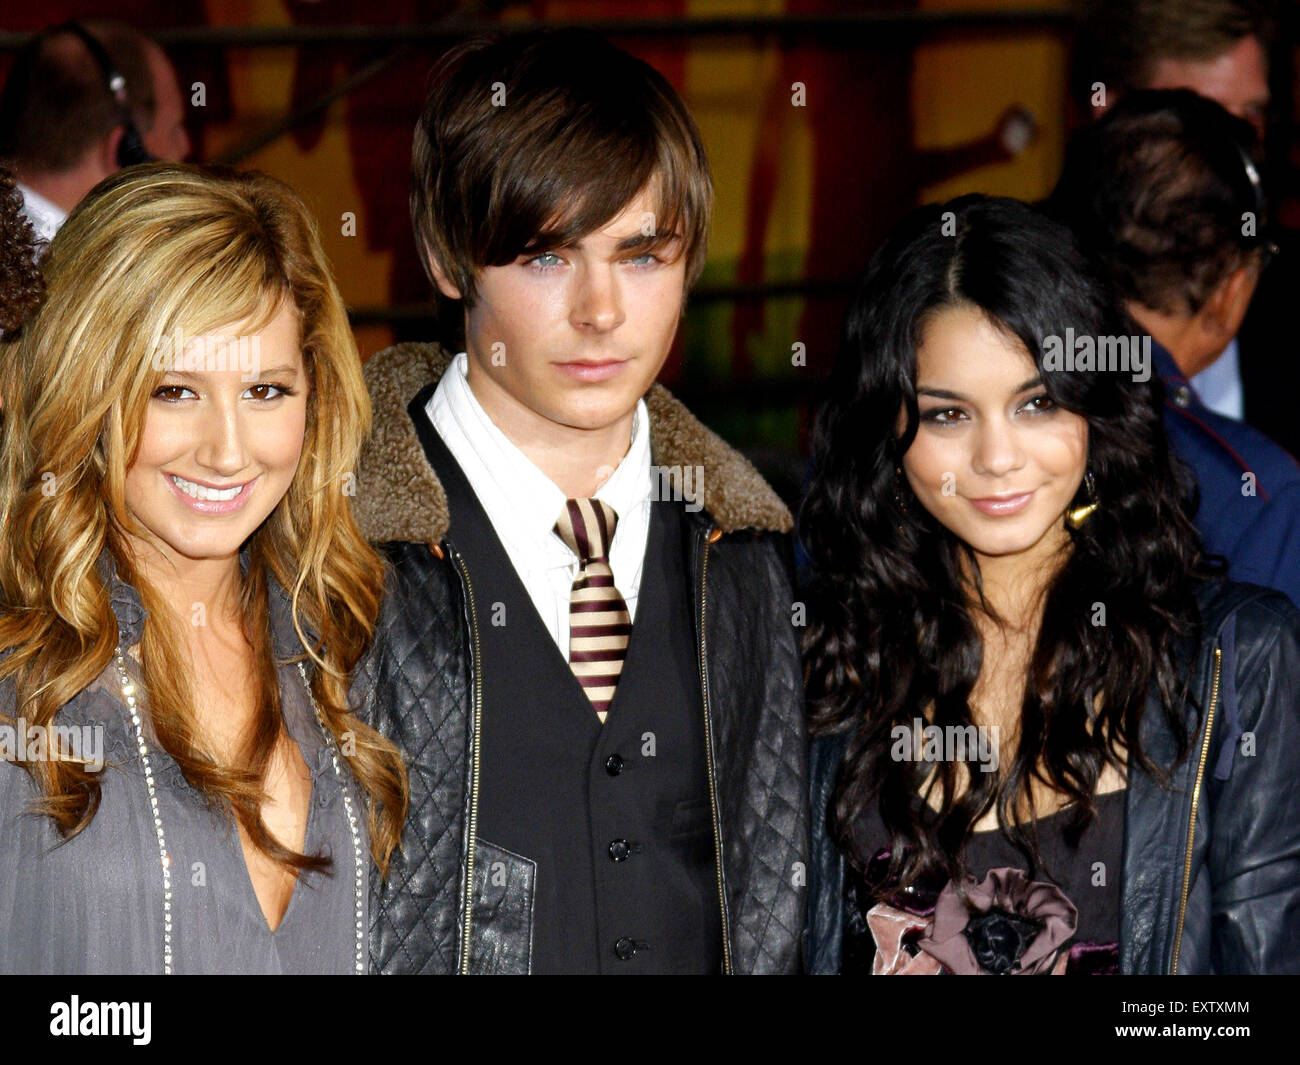 Ashley Tisdale, Zac Efron and Vanessa Anne Hudgens attend the DVD Release Premiere of 'High School Musical 2: Extended Edition' held at the El Capitan Theater in Hollywood, California, United States on November 19, 2007. Stock Photo